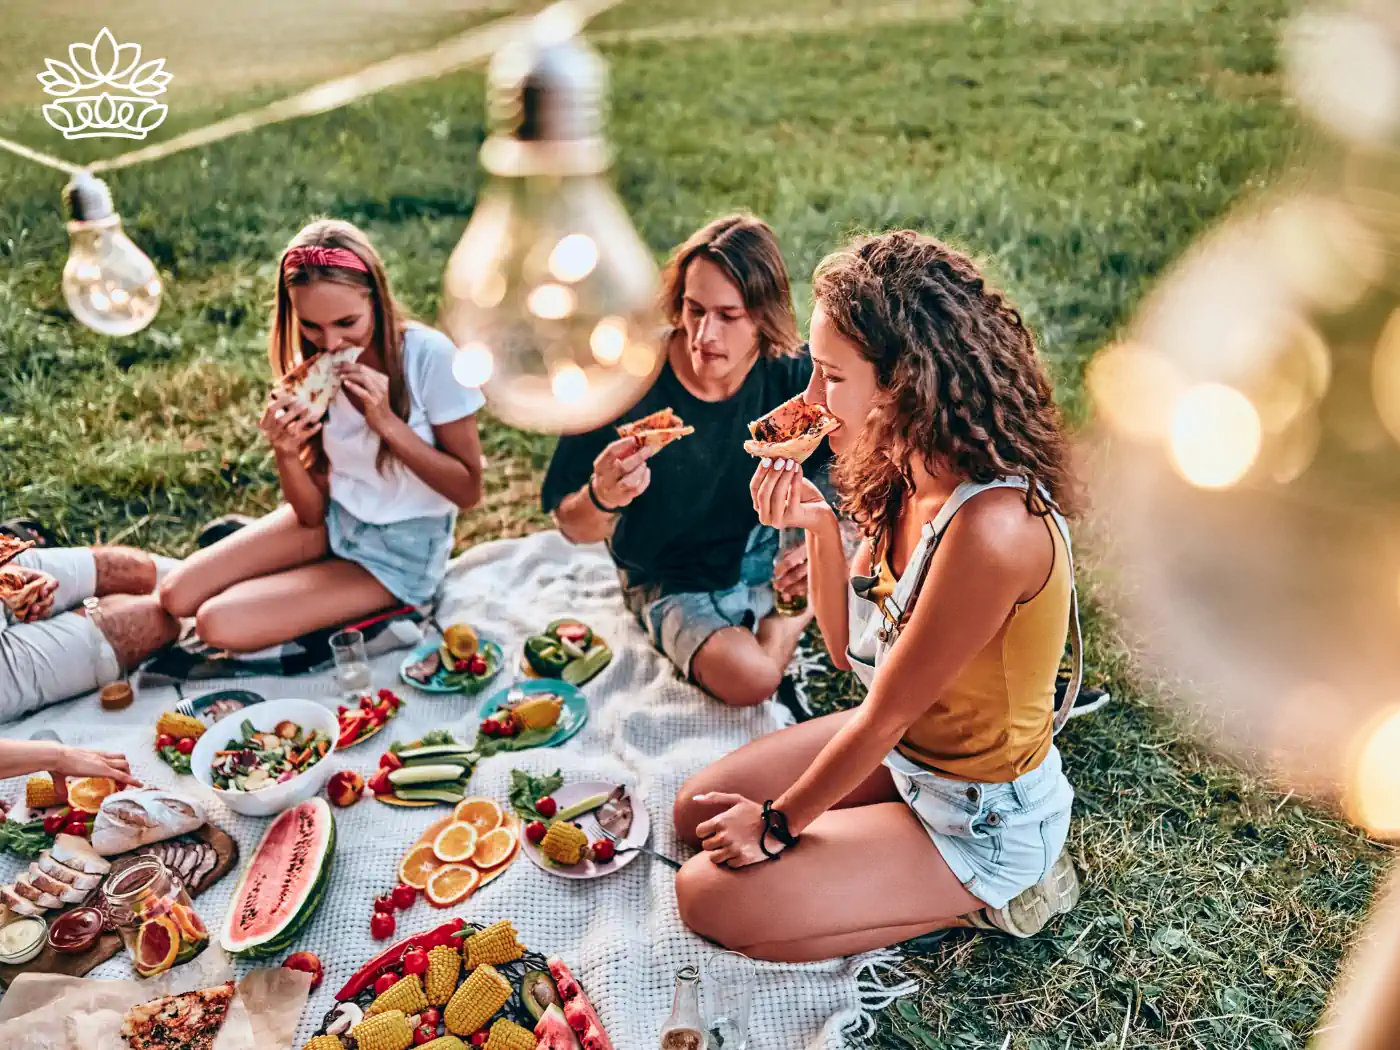 A group of friends enjoying a picnic on a lush green lawn, sharing a variety of fresh fruits, sandwiches, and drinks. Fabulous Flowers and Gifts - Picnic Gift Baskets Collection.